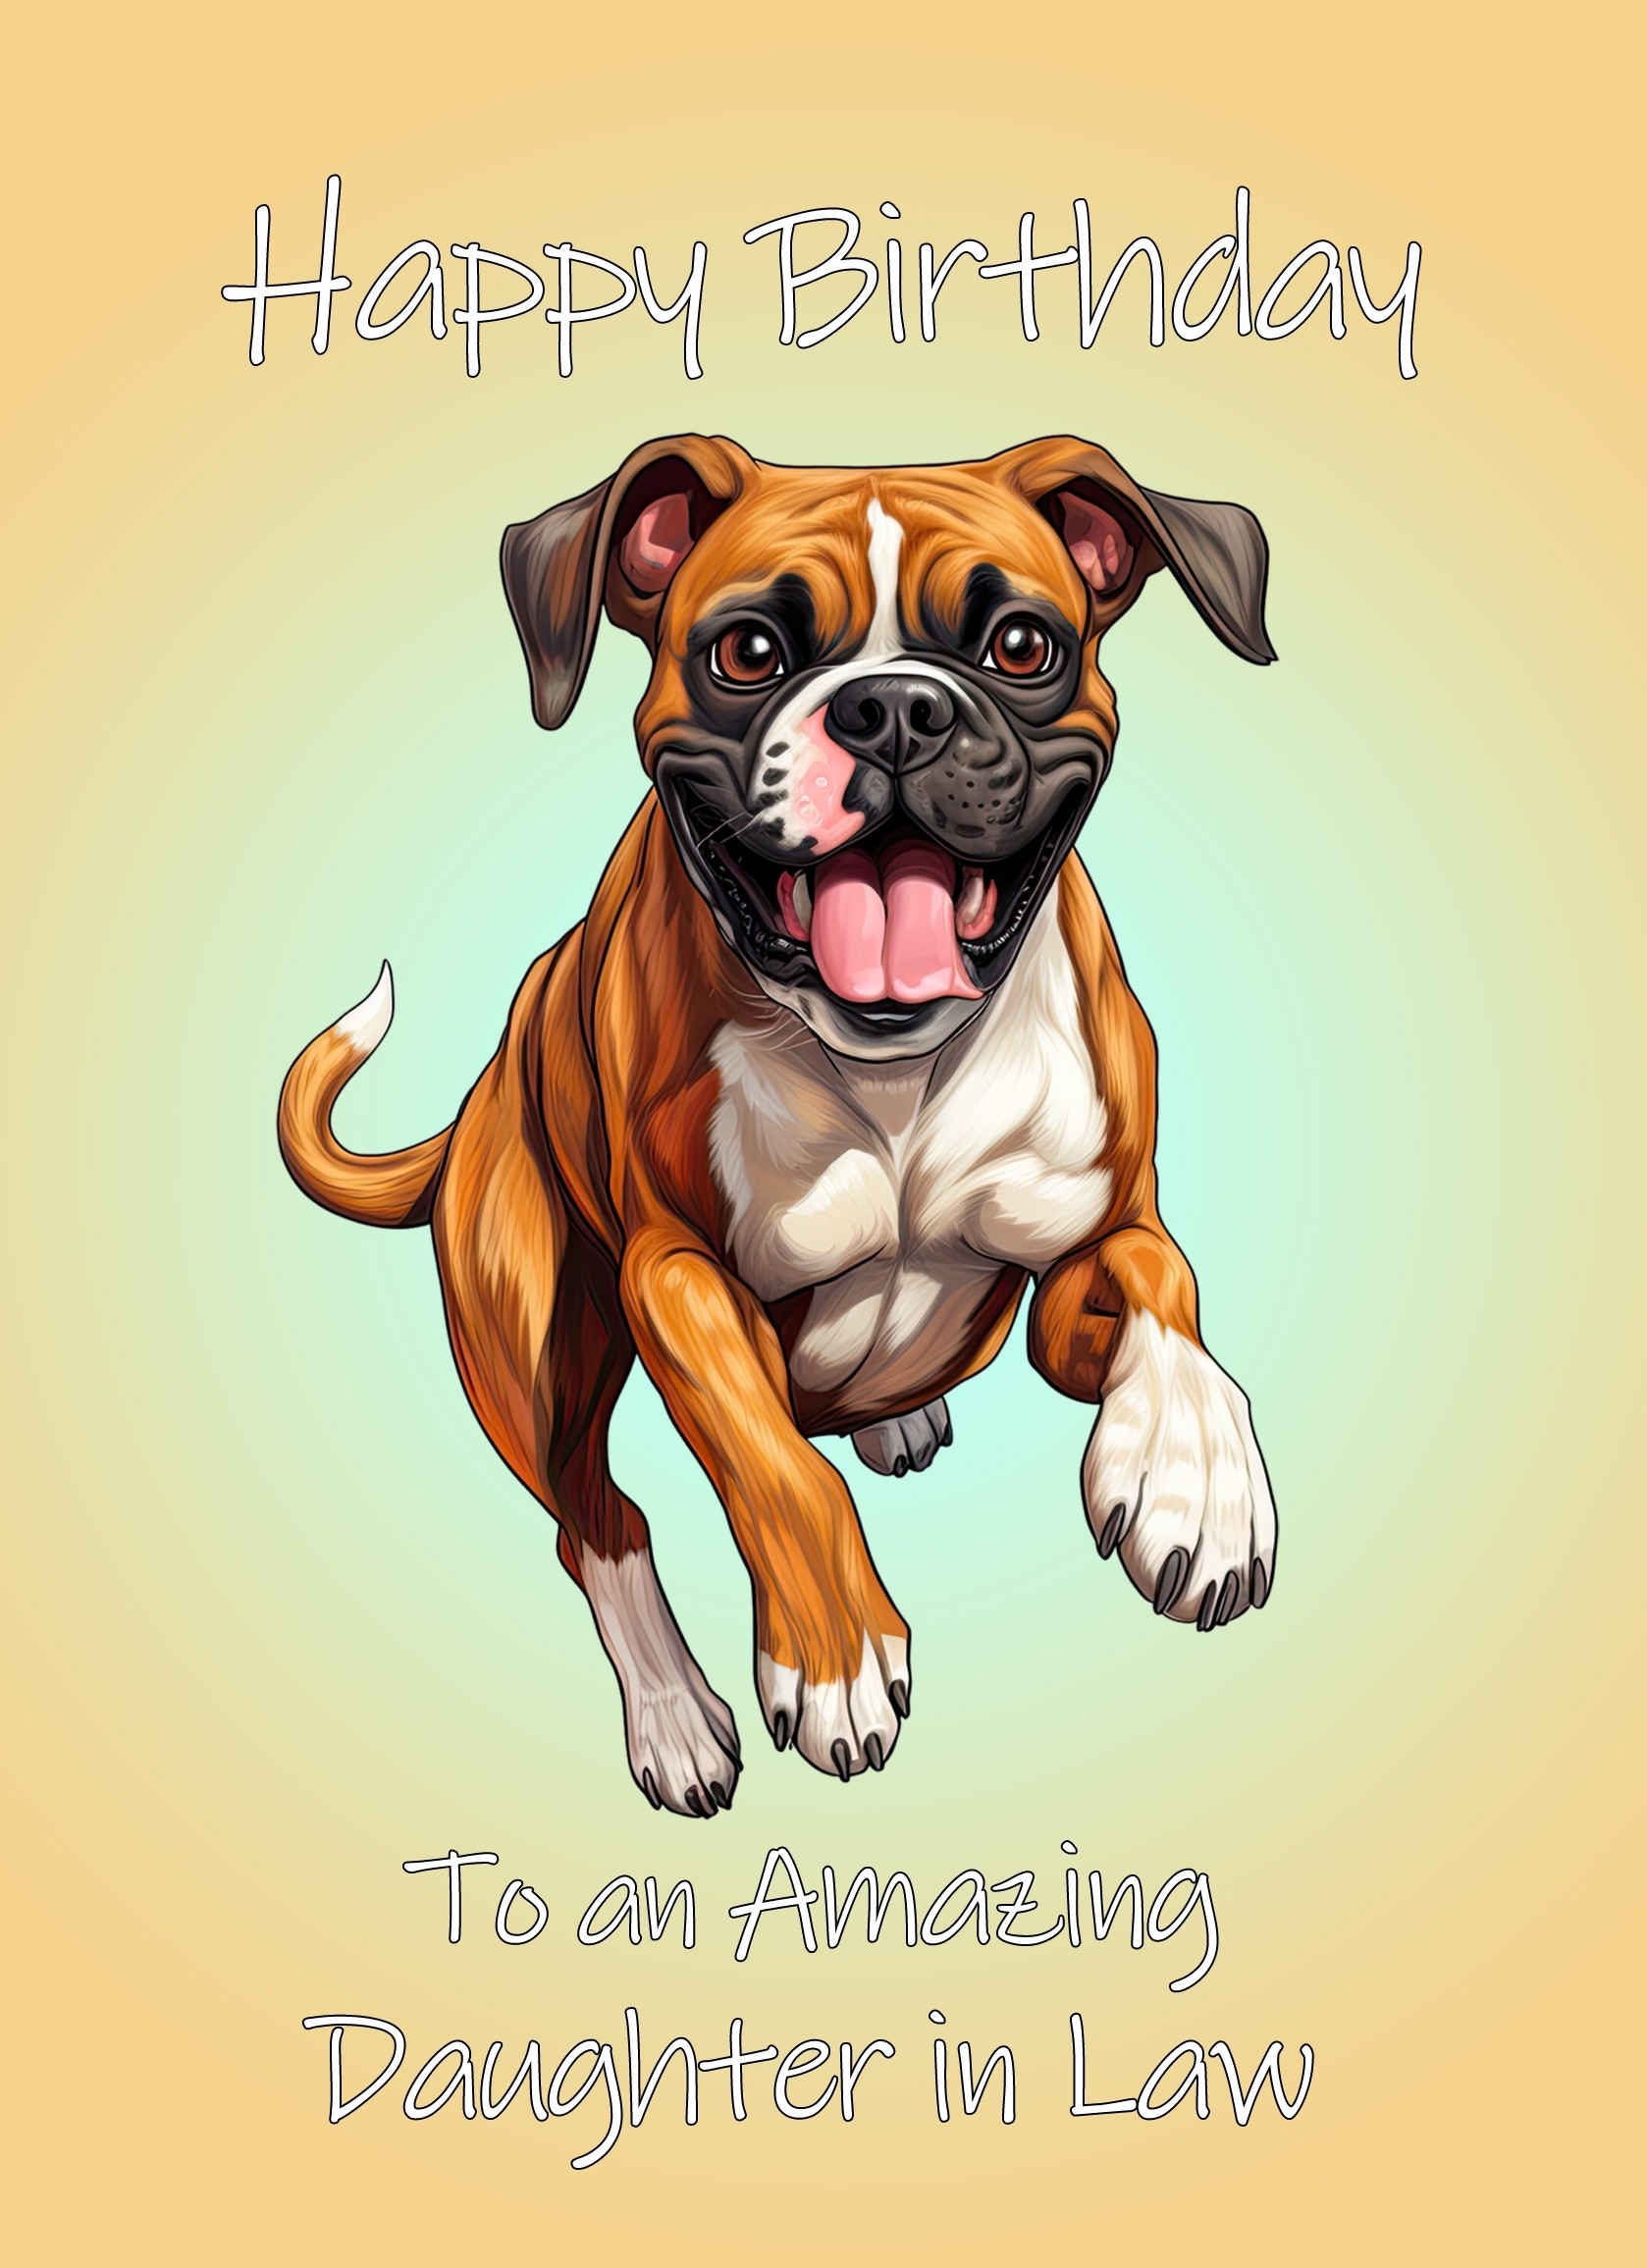 Boxer Dog Birthday Card For Daughter in Law